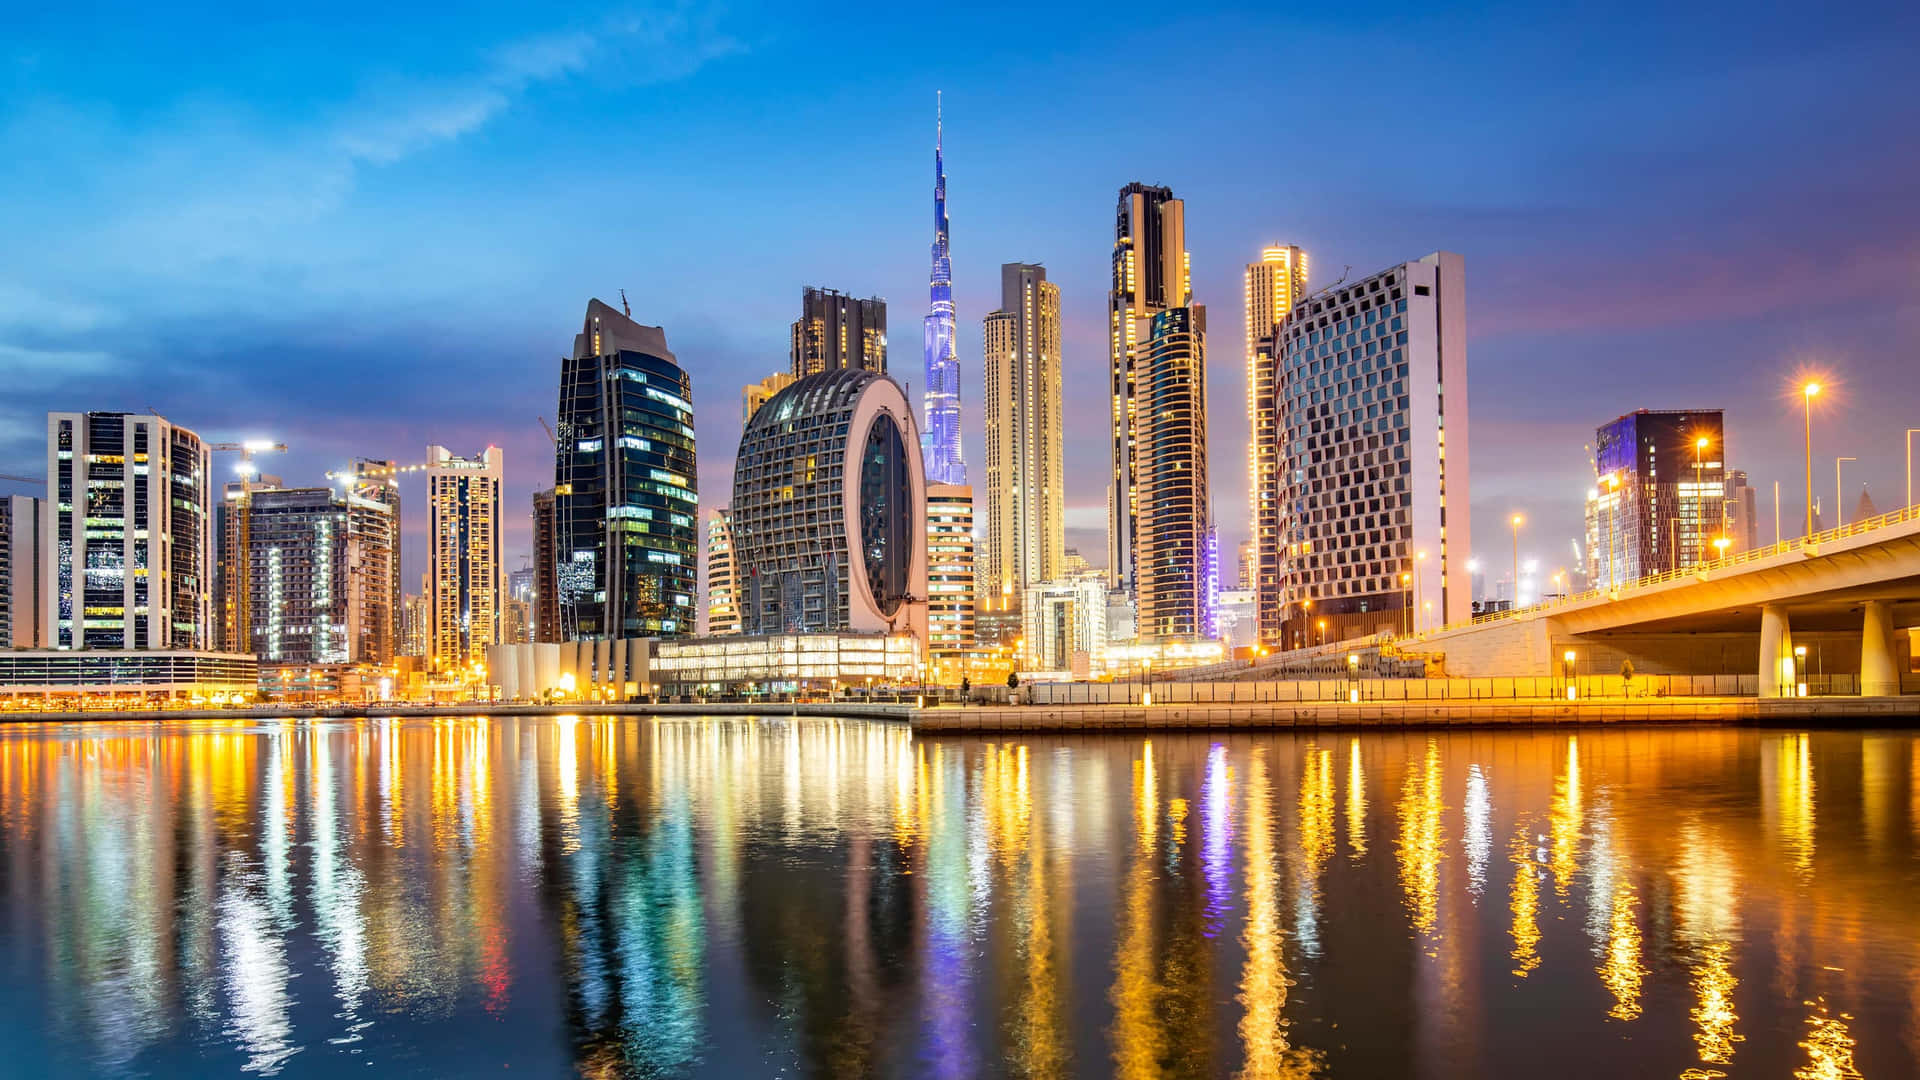 The life of luxury and adventure awaits in Dubai